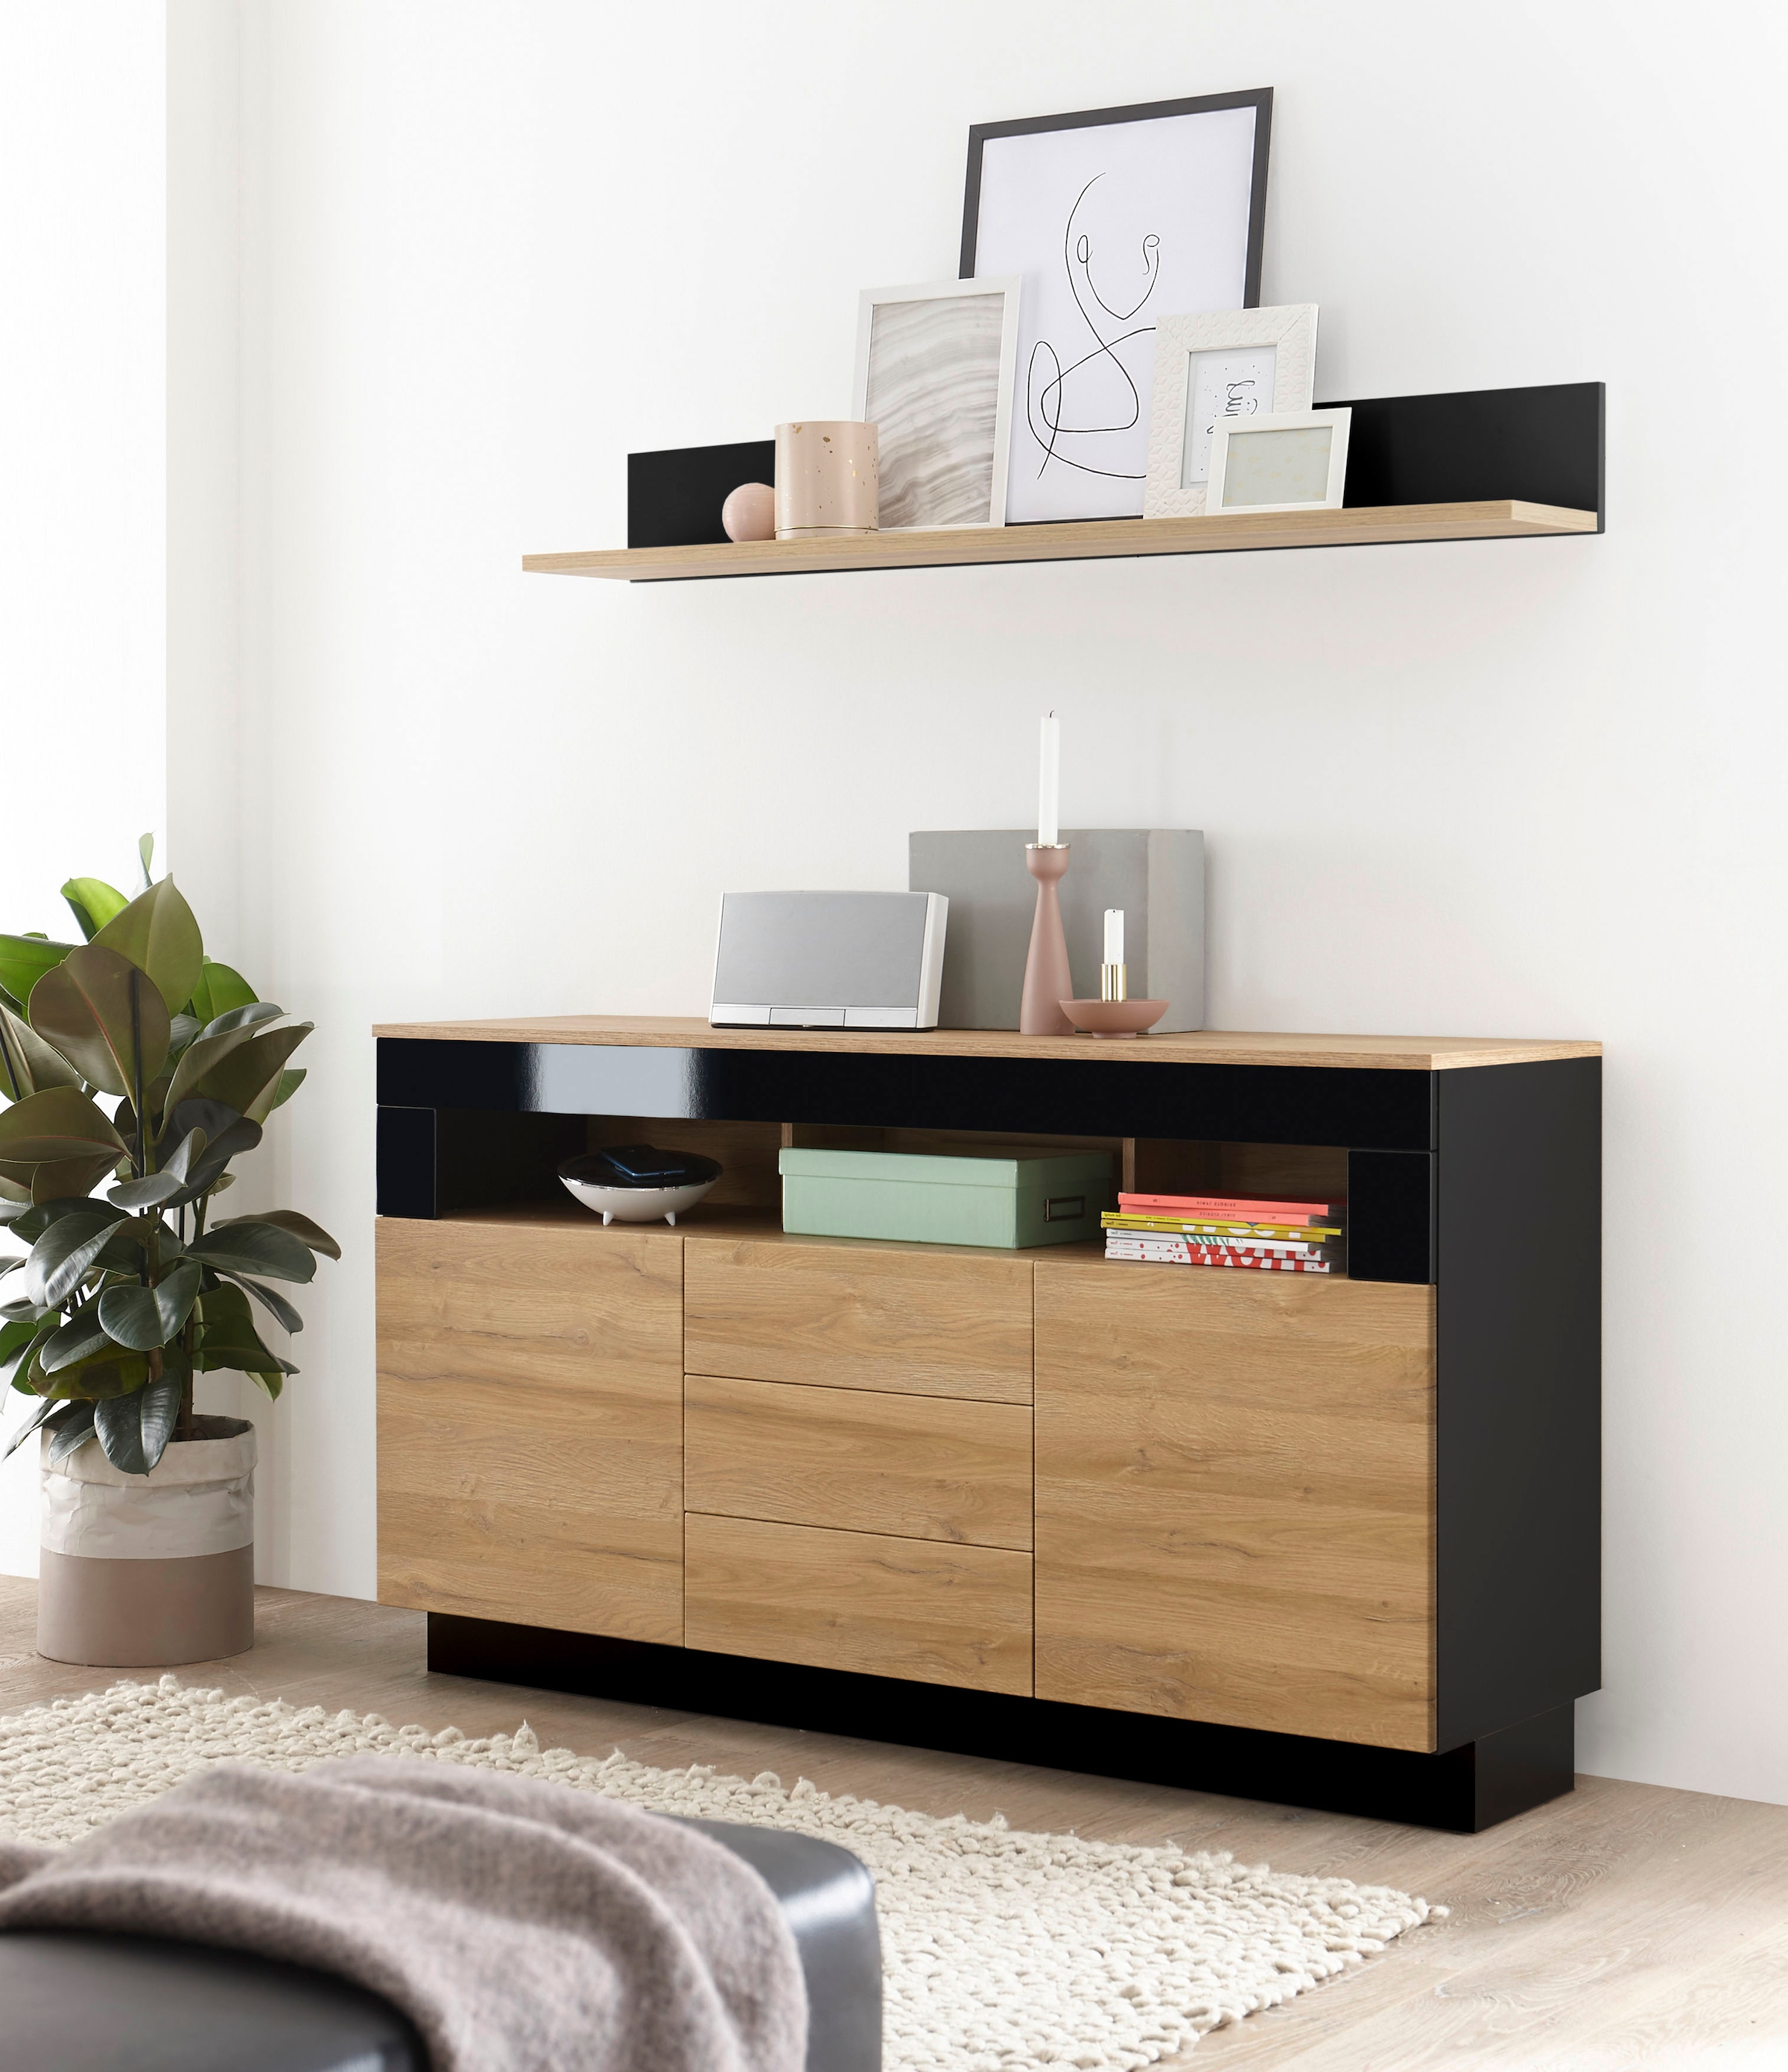 Places of Style Sideboard Trouver sur Breite »Cayman«, ca. cm 150